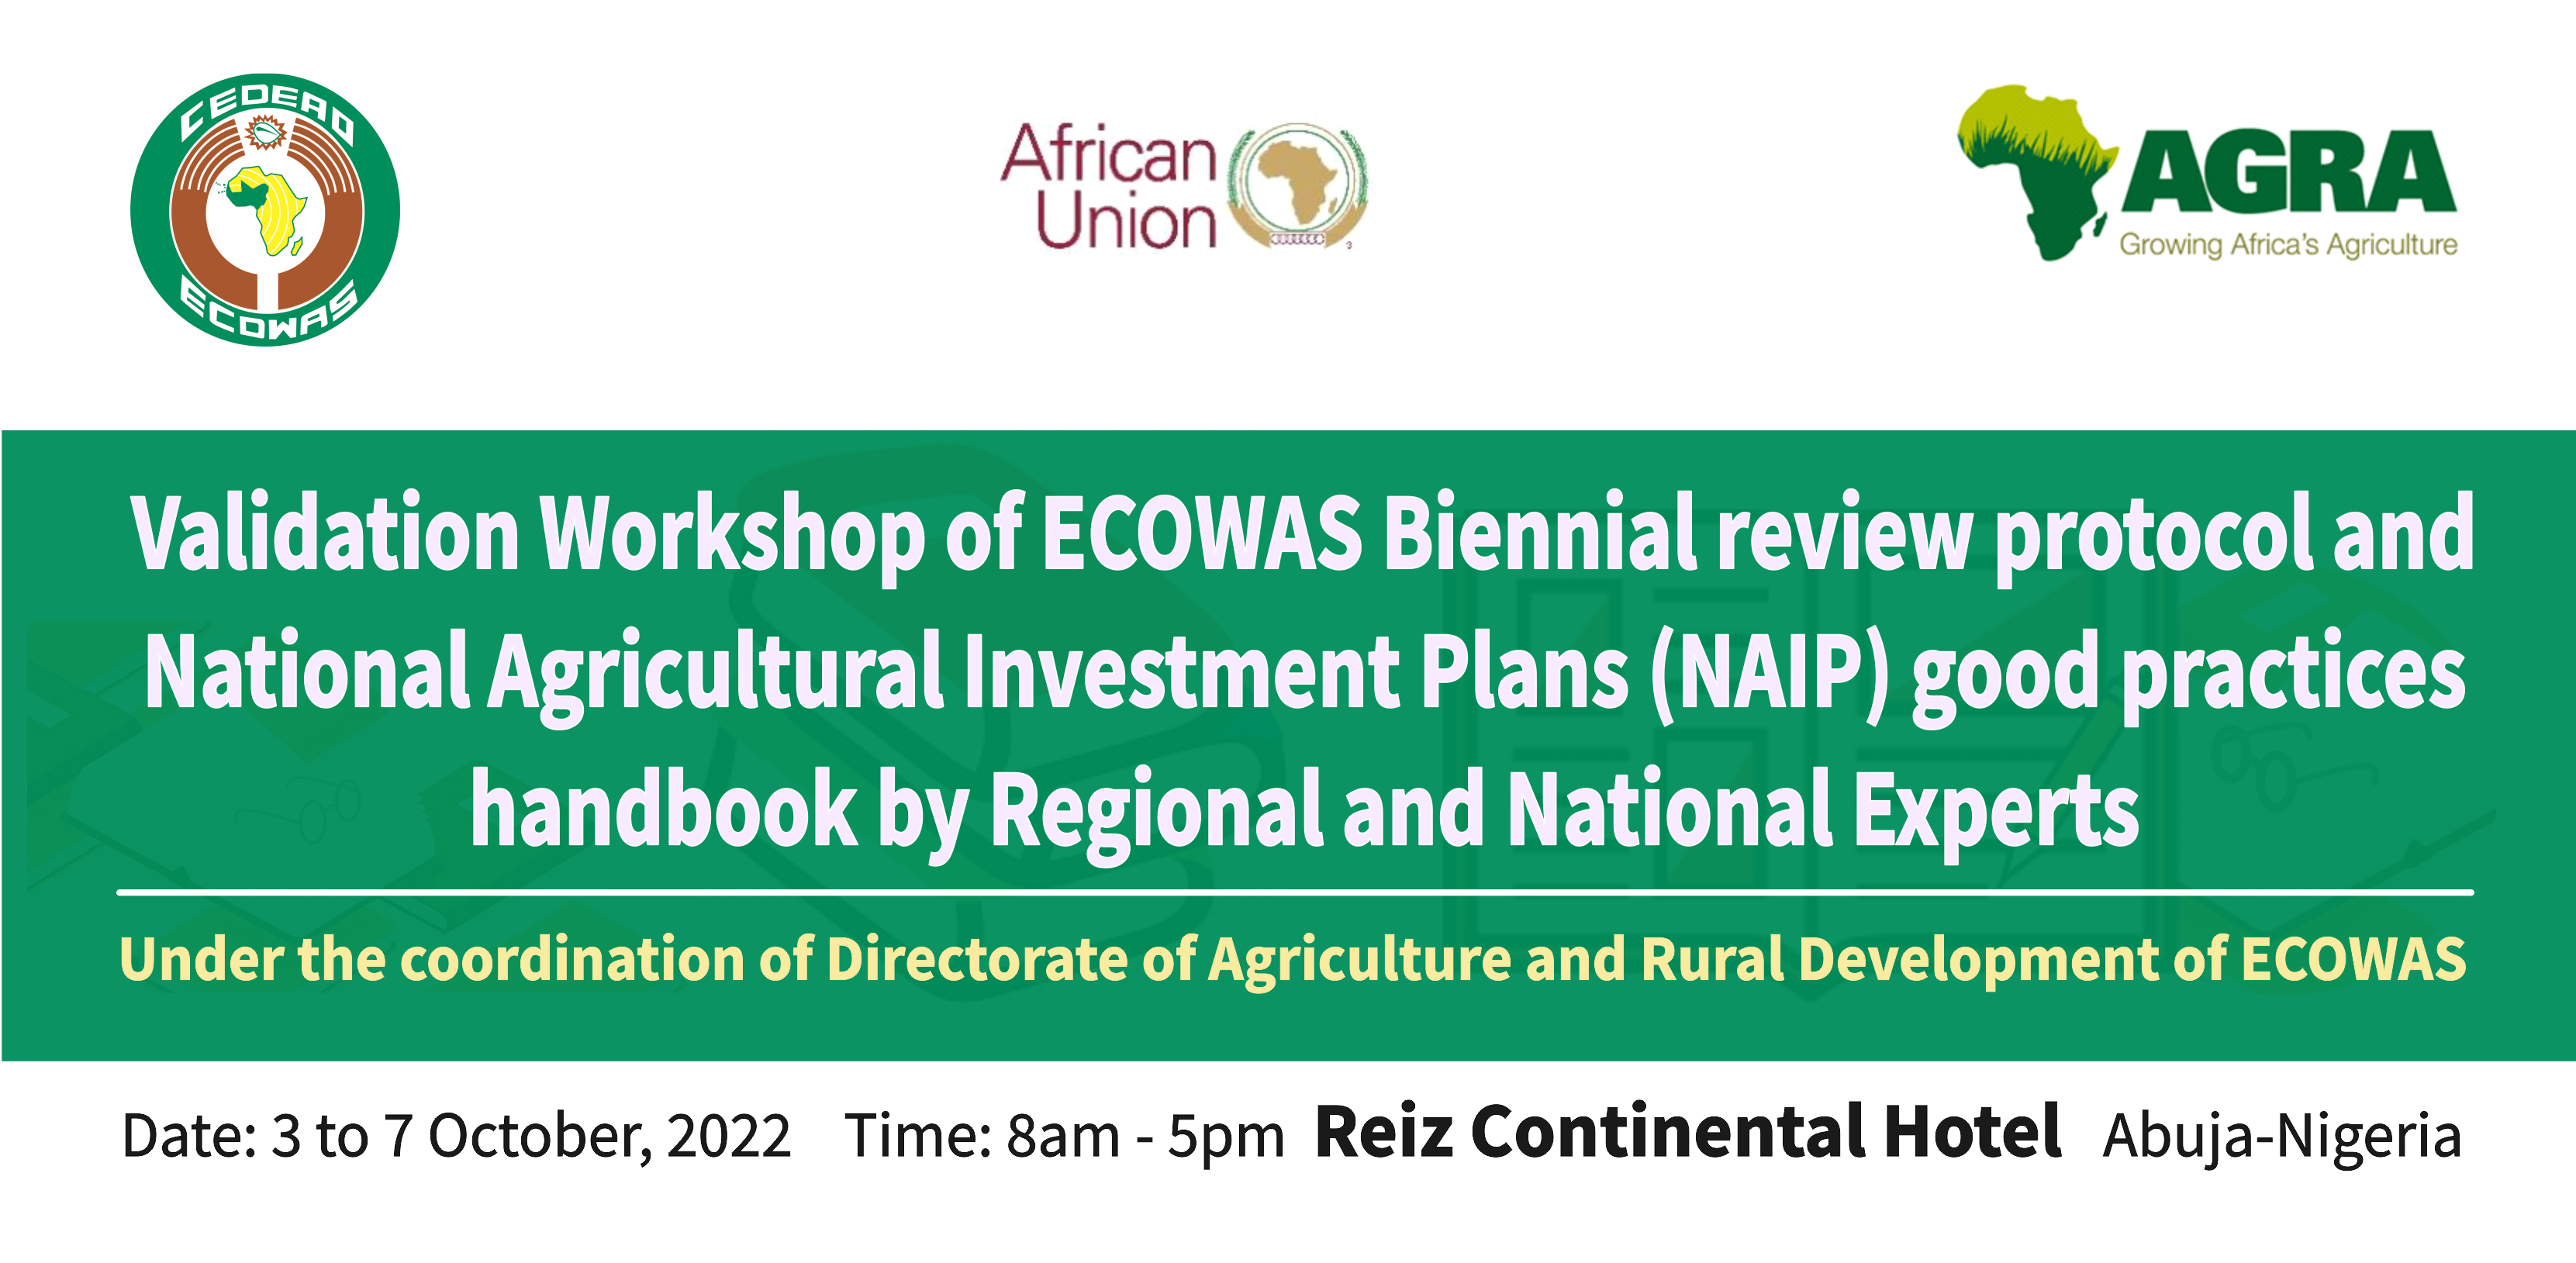 Validation workshop  of ECOWAS BR protocol and NAIP good practices handbook by Regional and National Experts